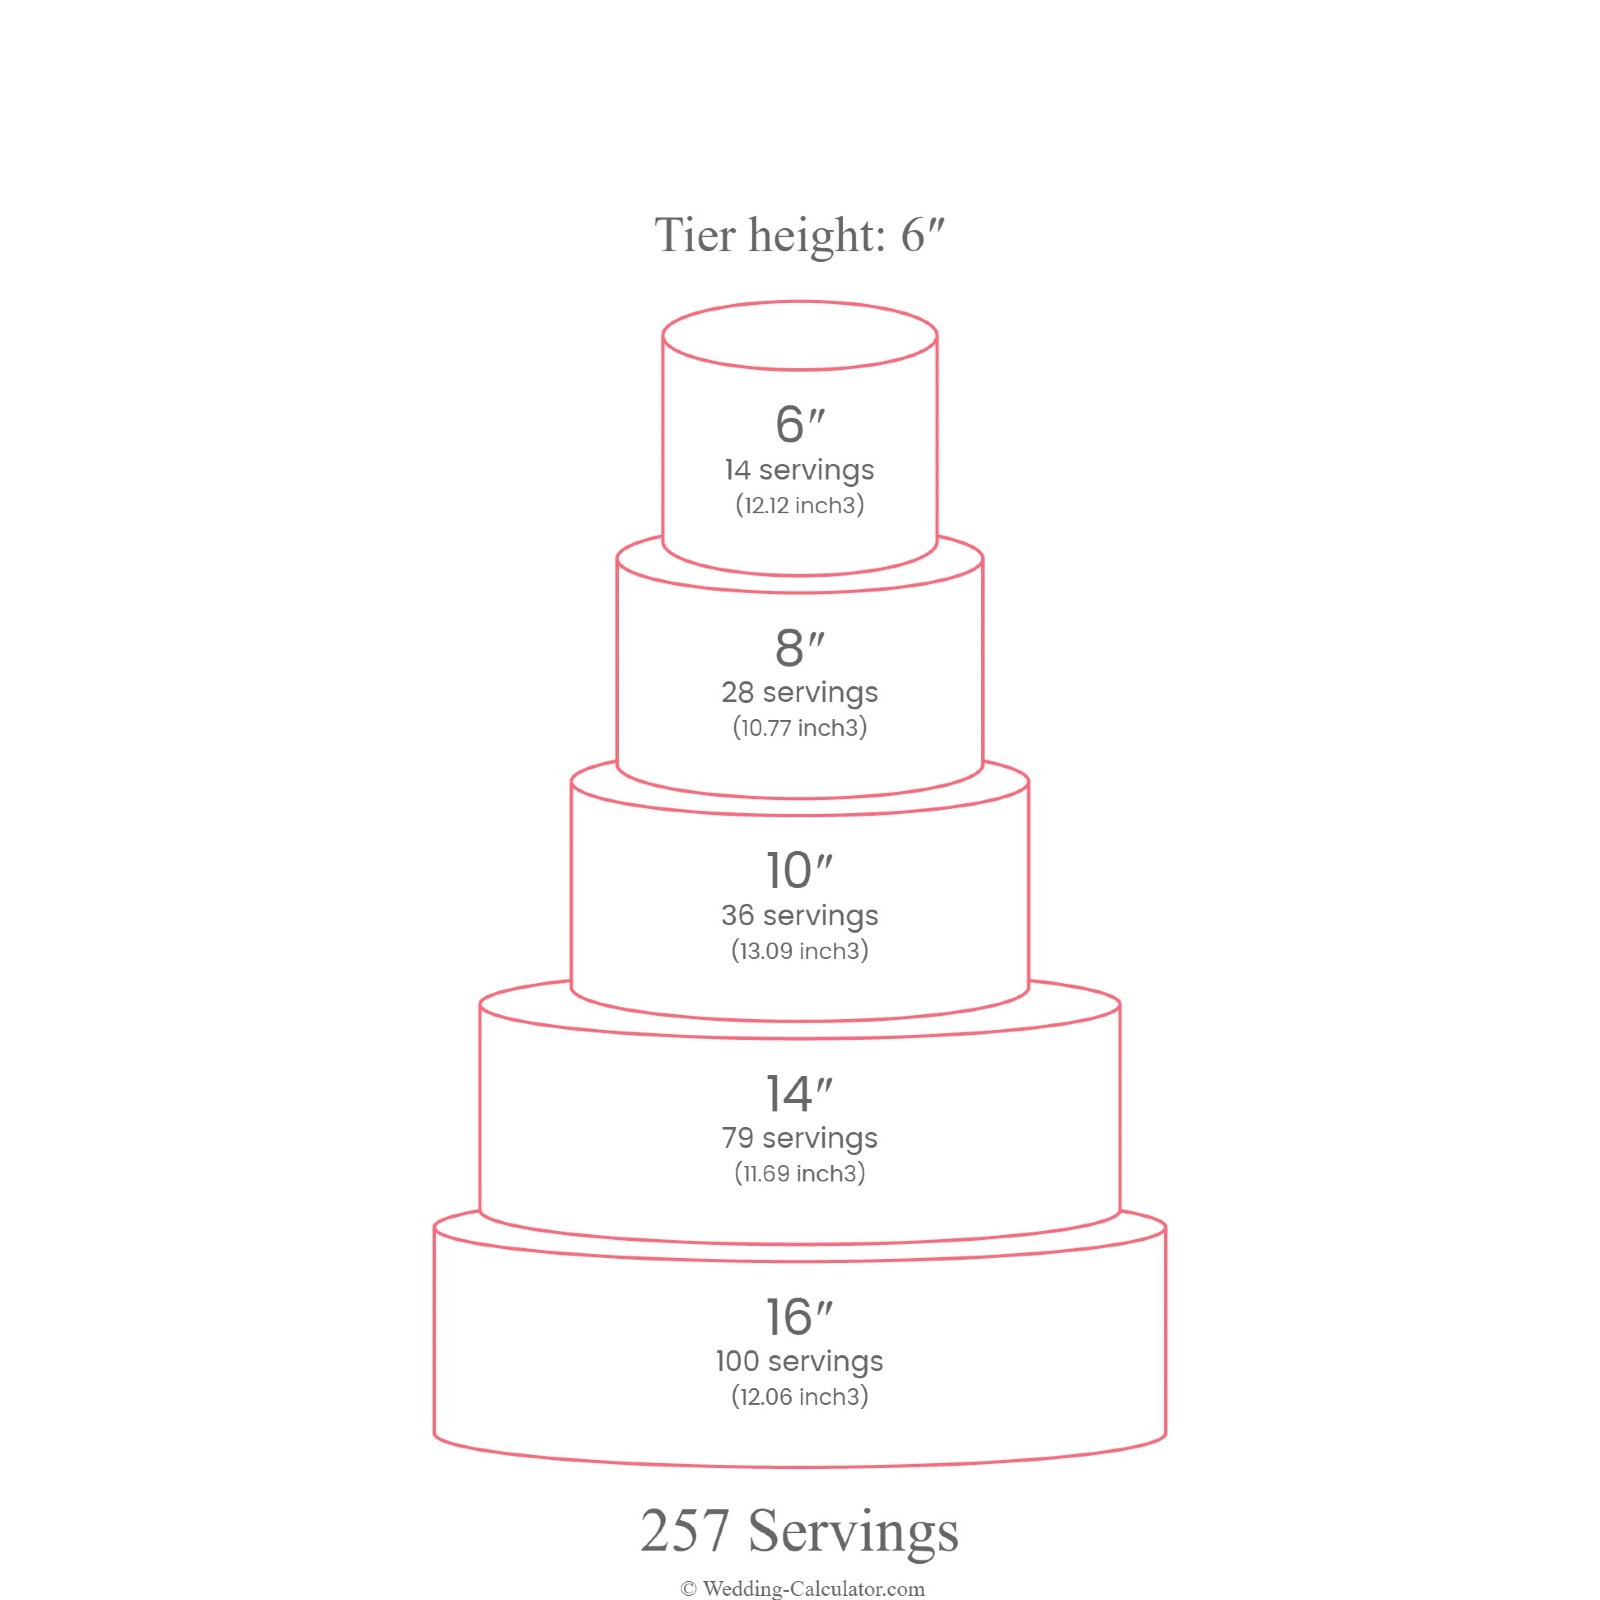 An alternative wedding cake size for 250 guests